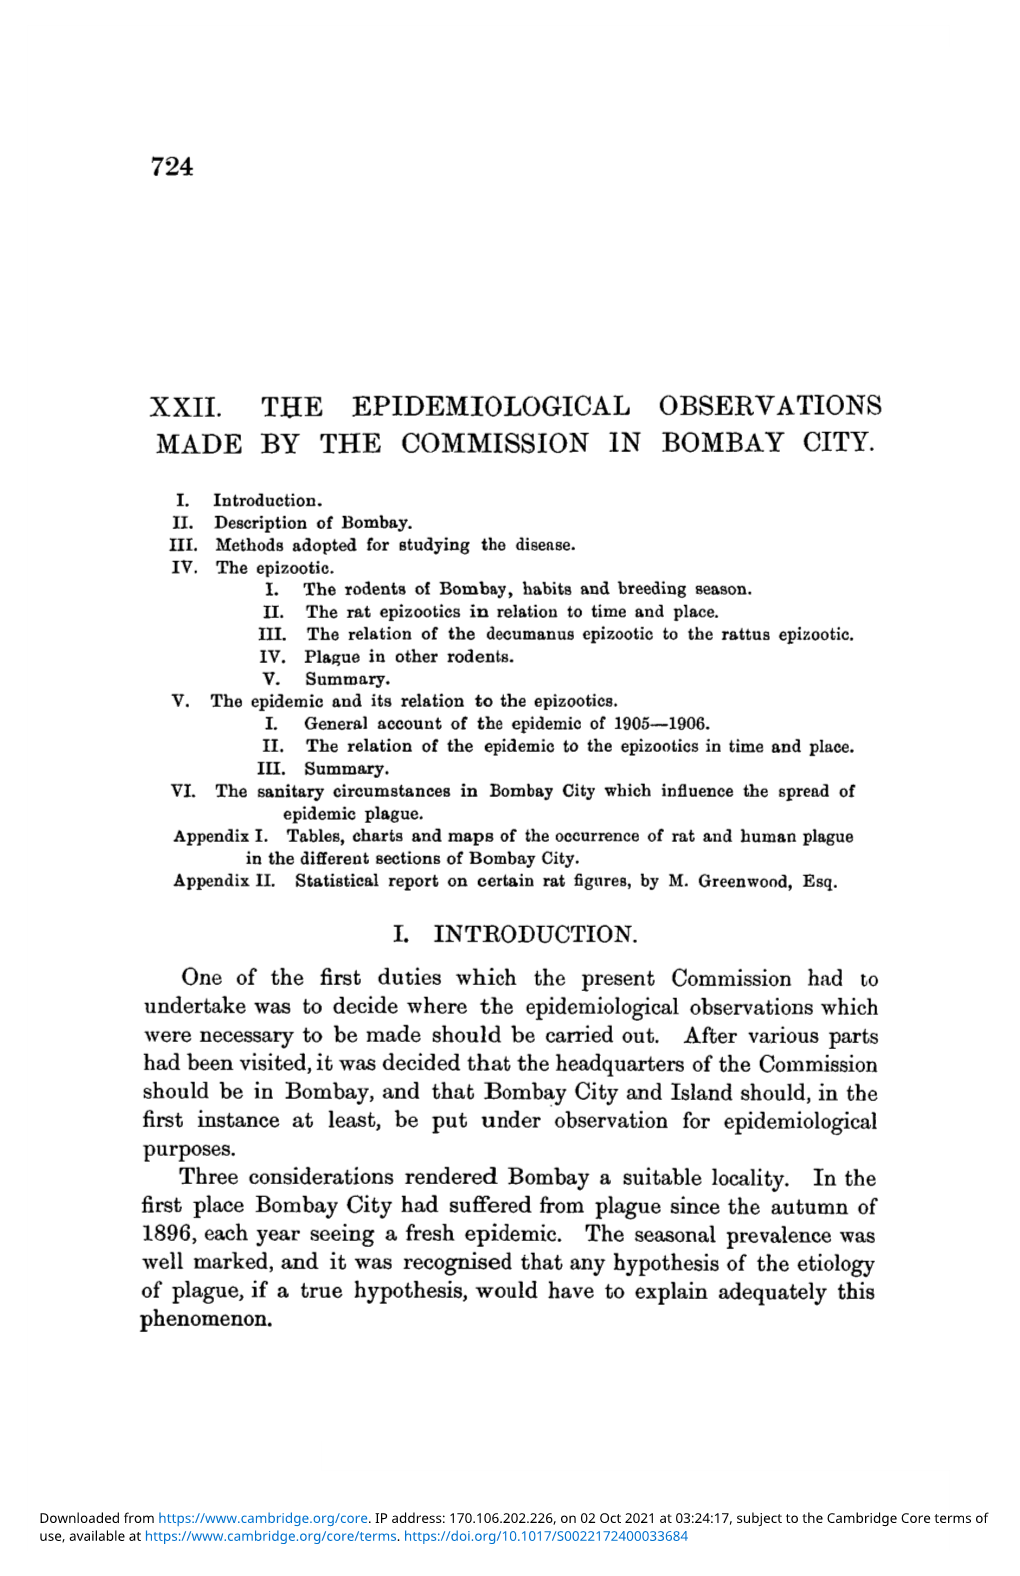 Xxii. the Epidemiological Observations Made by the Commission in Bombay City